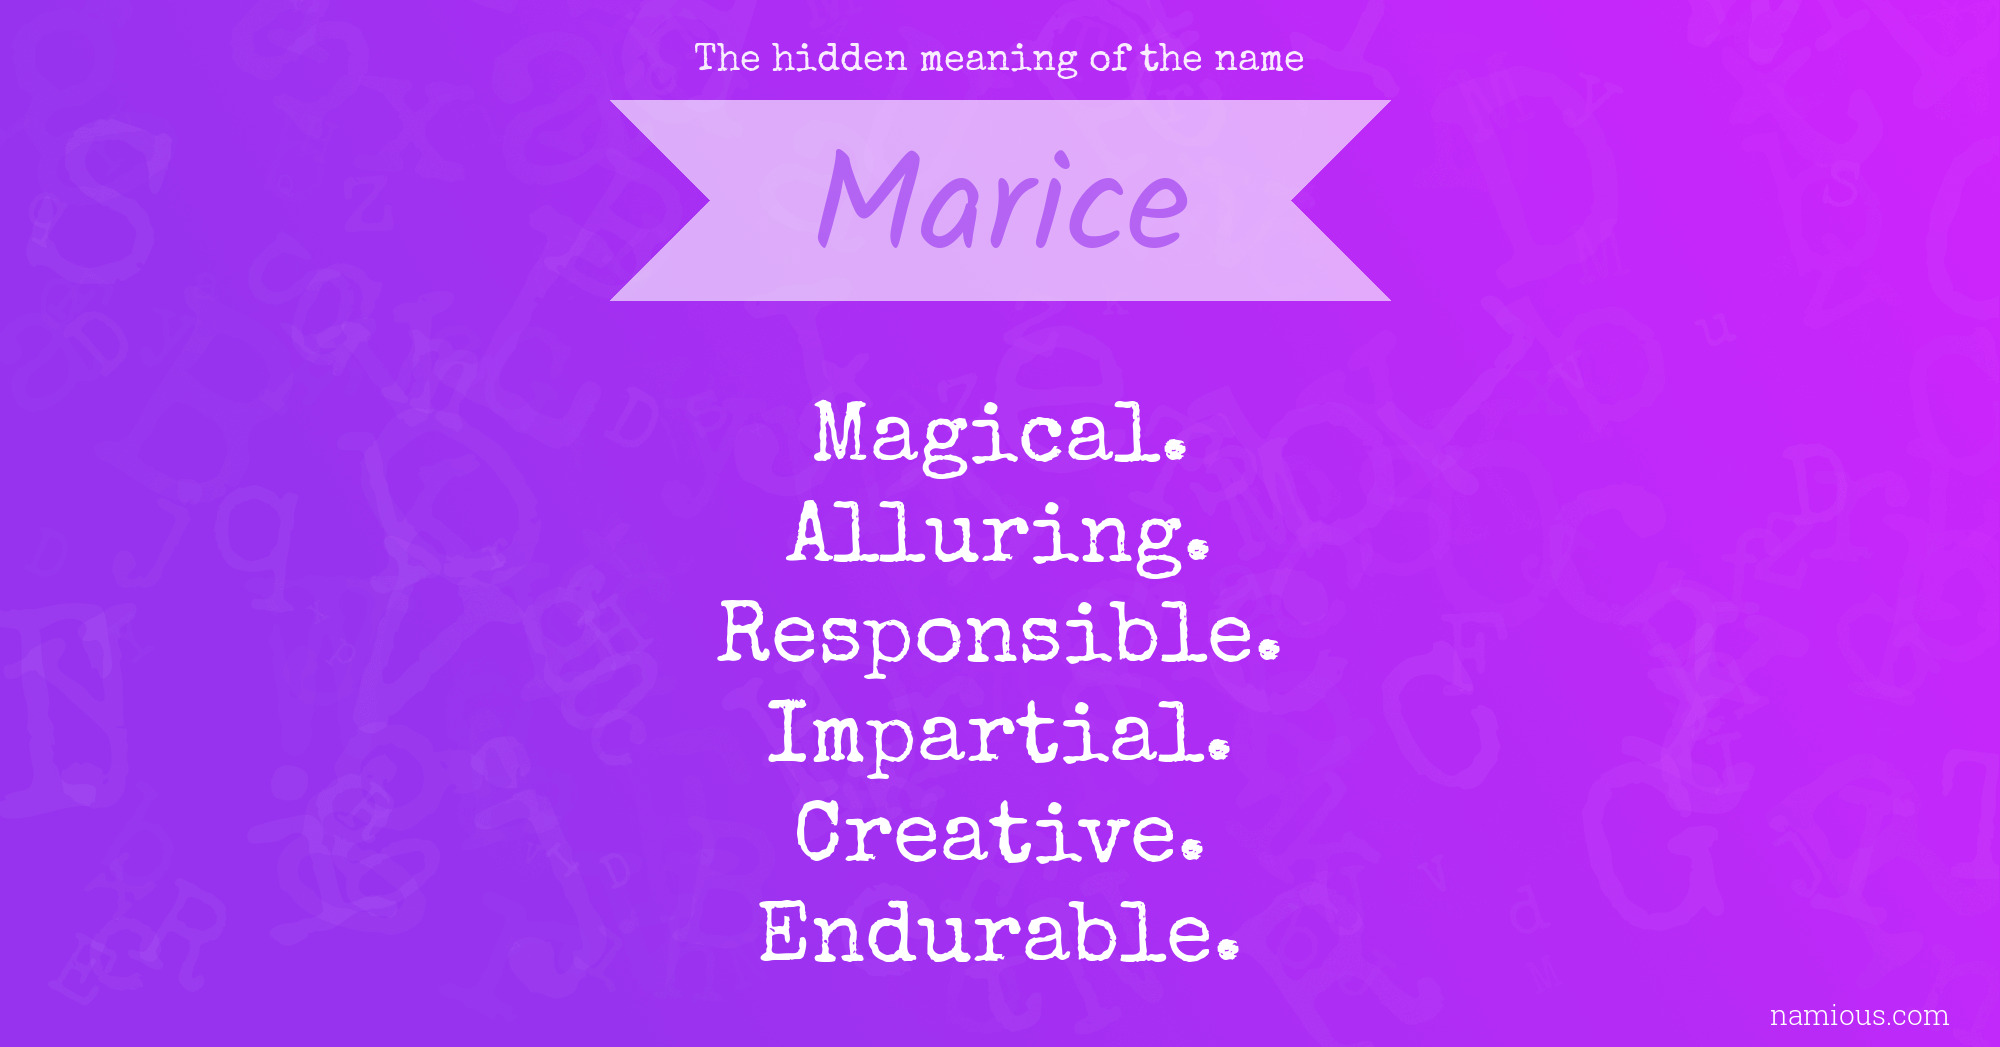 The hidden meaning of the name Marice